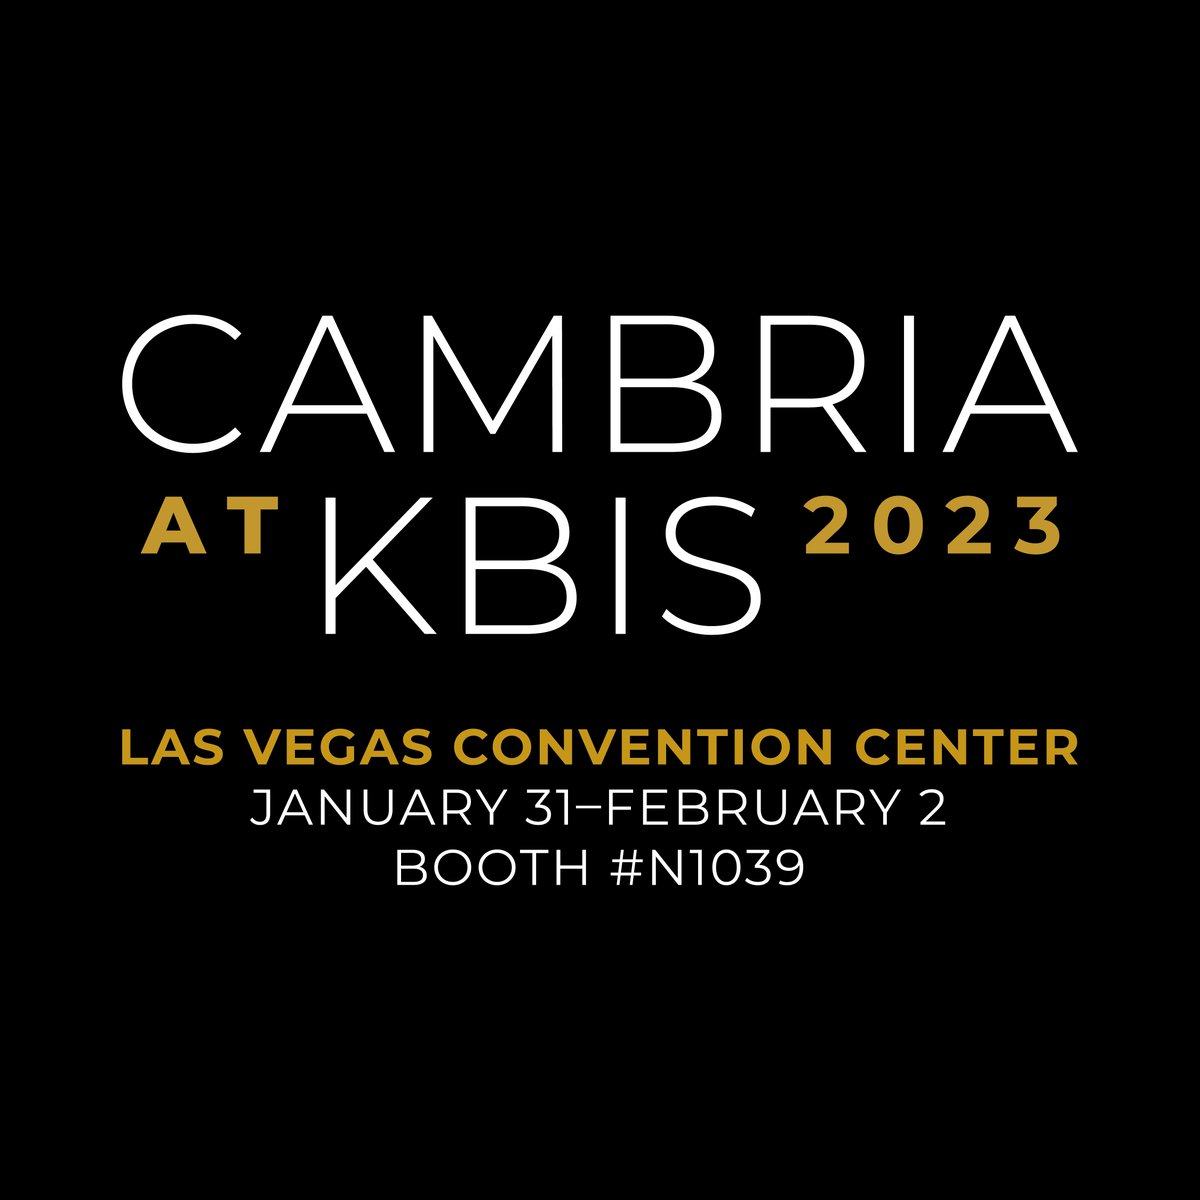 Experience the revolutionary luxury of @CambriaSurfaces quartz surfaces at #KBIS2023! Featuring NEW designs, never-before-seen tones, dynamic textures, and timeless aesthetics. Message me for a complimentary pass!